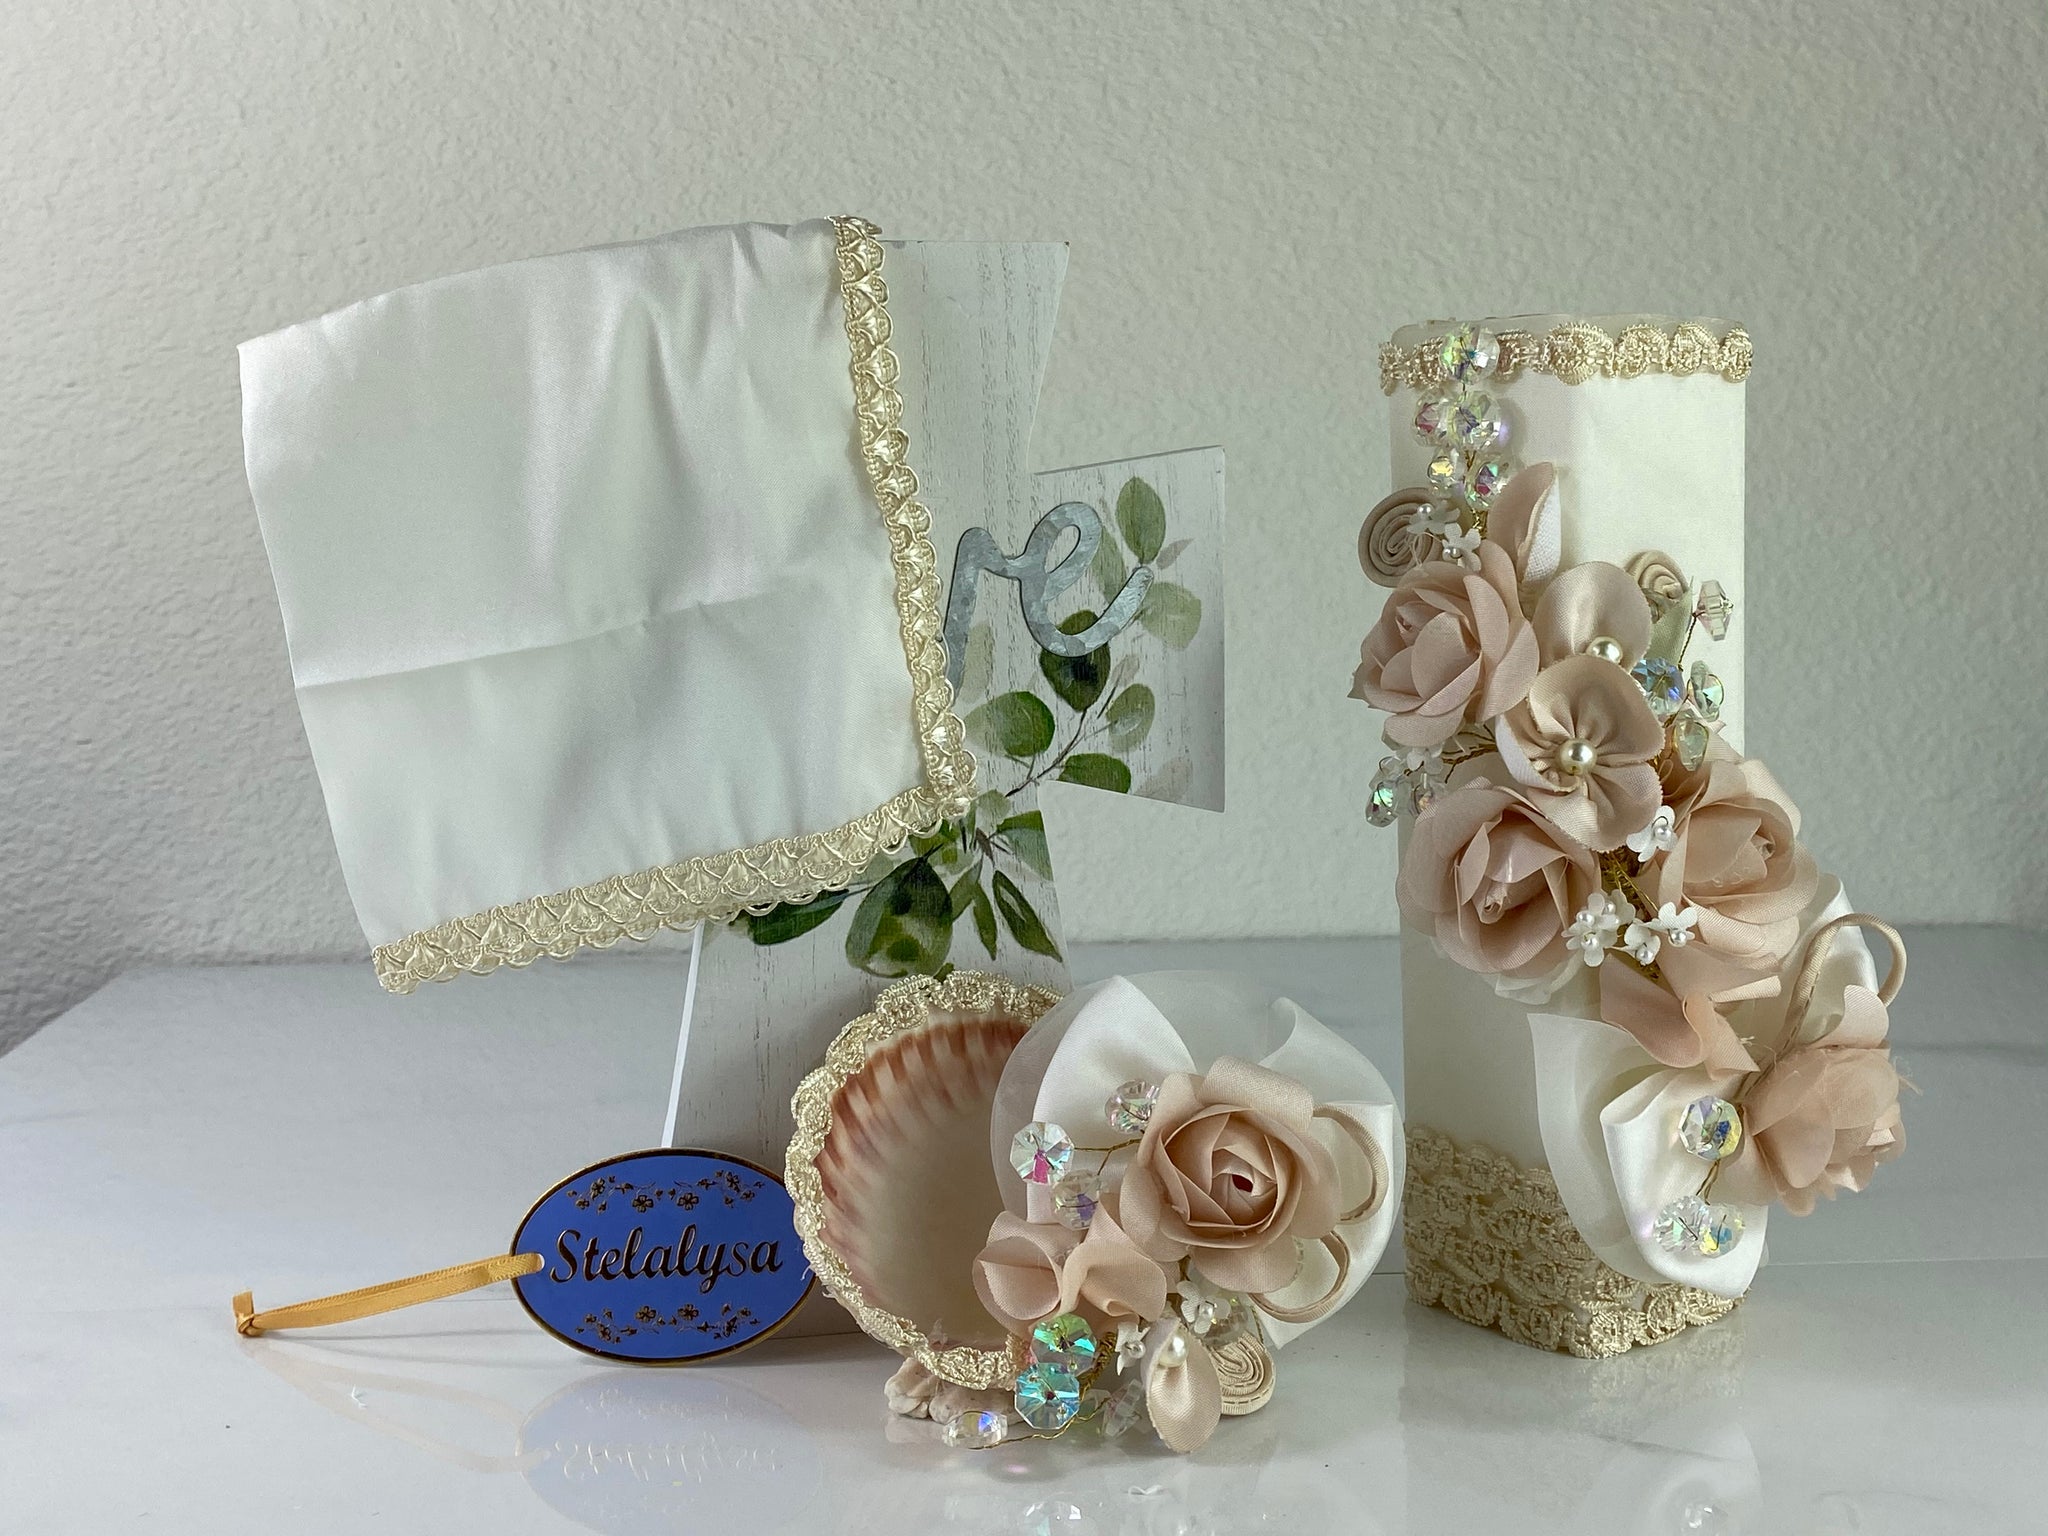 These one-of-a-kind Candle set is handmade and ivory in color.  This candle can also be use with a white baptism outfit because it has an array of light colors including white.   It is uniquely decorated with ribbon, pearls, crystals, flowers, and beads making it a gorgeous keepsake.   This candle is square in shape.    To match, the Shell is put together piece by piece to compliment the Candle and Handkerchief.  The Handkerchief is made of satin and embroidered lace